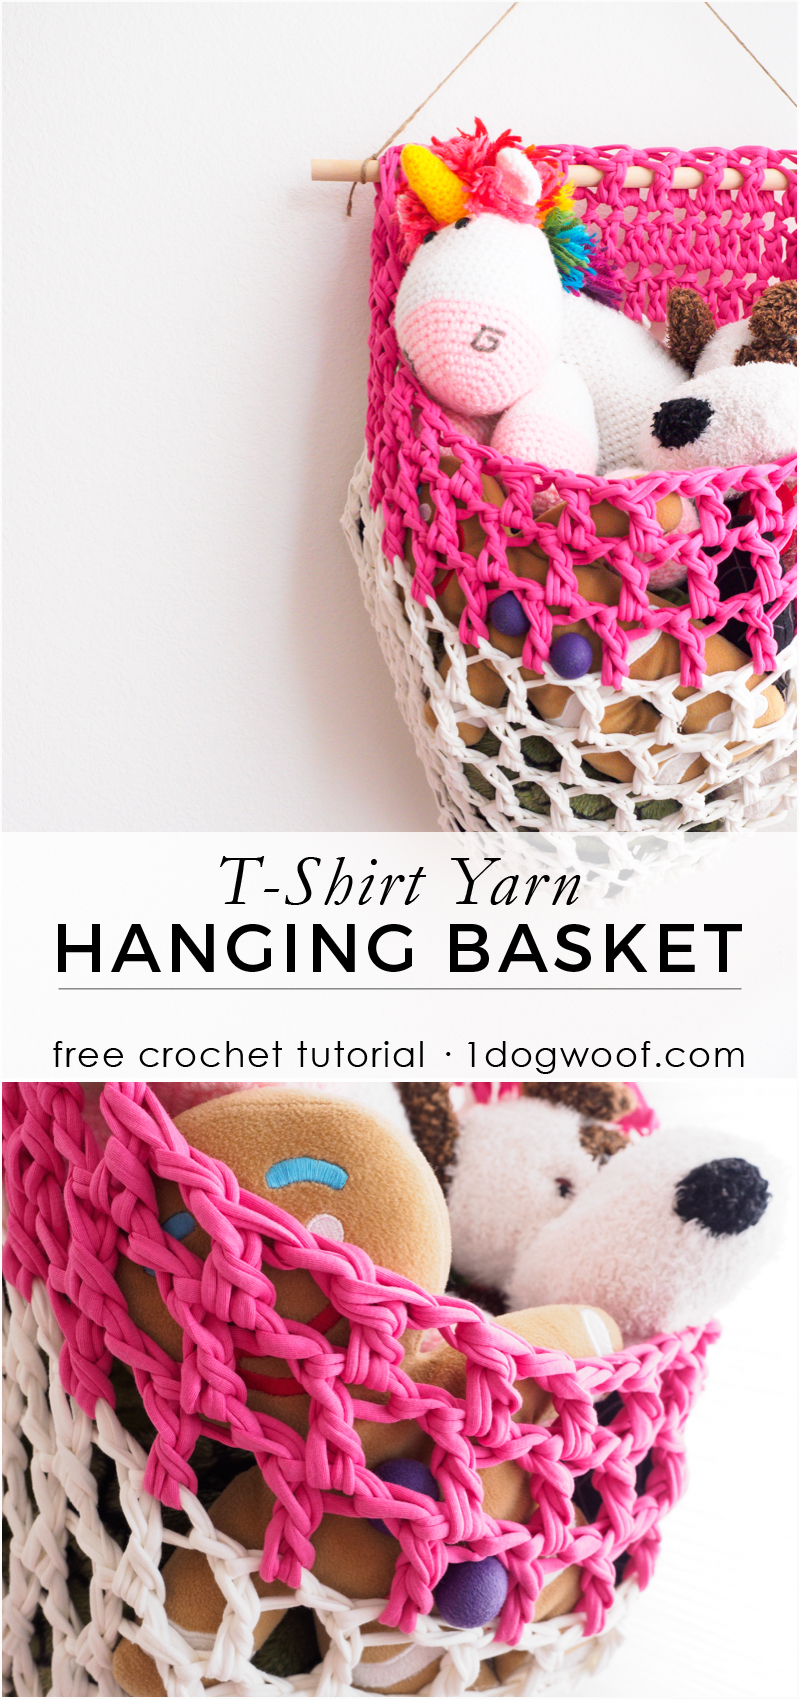 Make a fabric yarn or t-shirt yarn hanging basket with this free crochet pattern from 1dogwoof.com